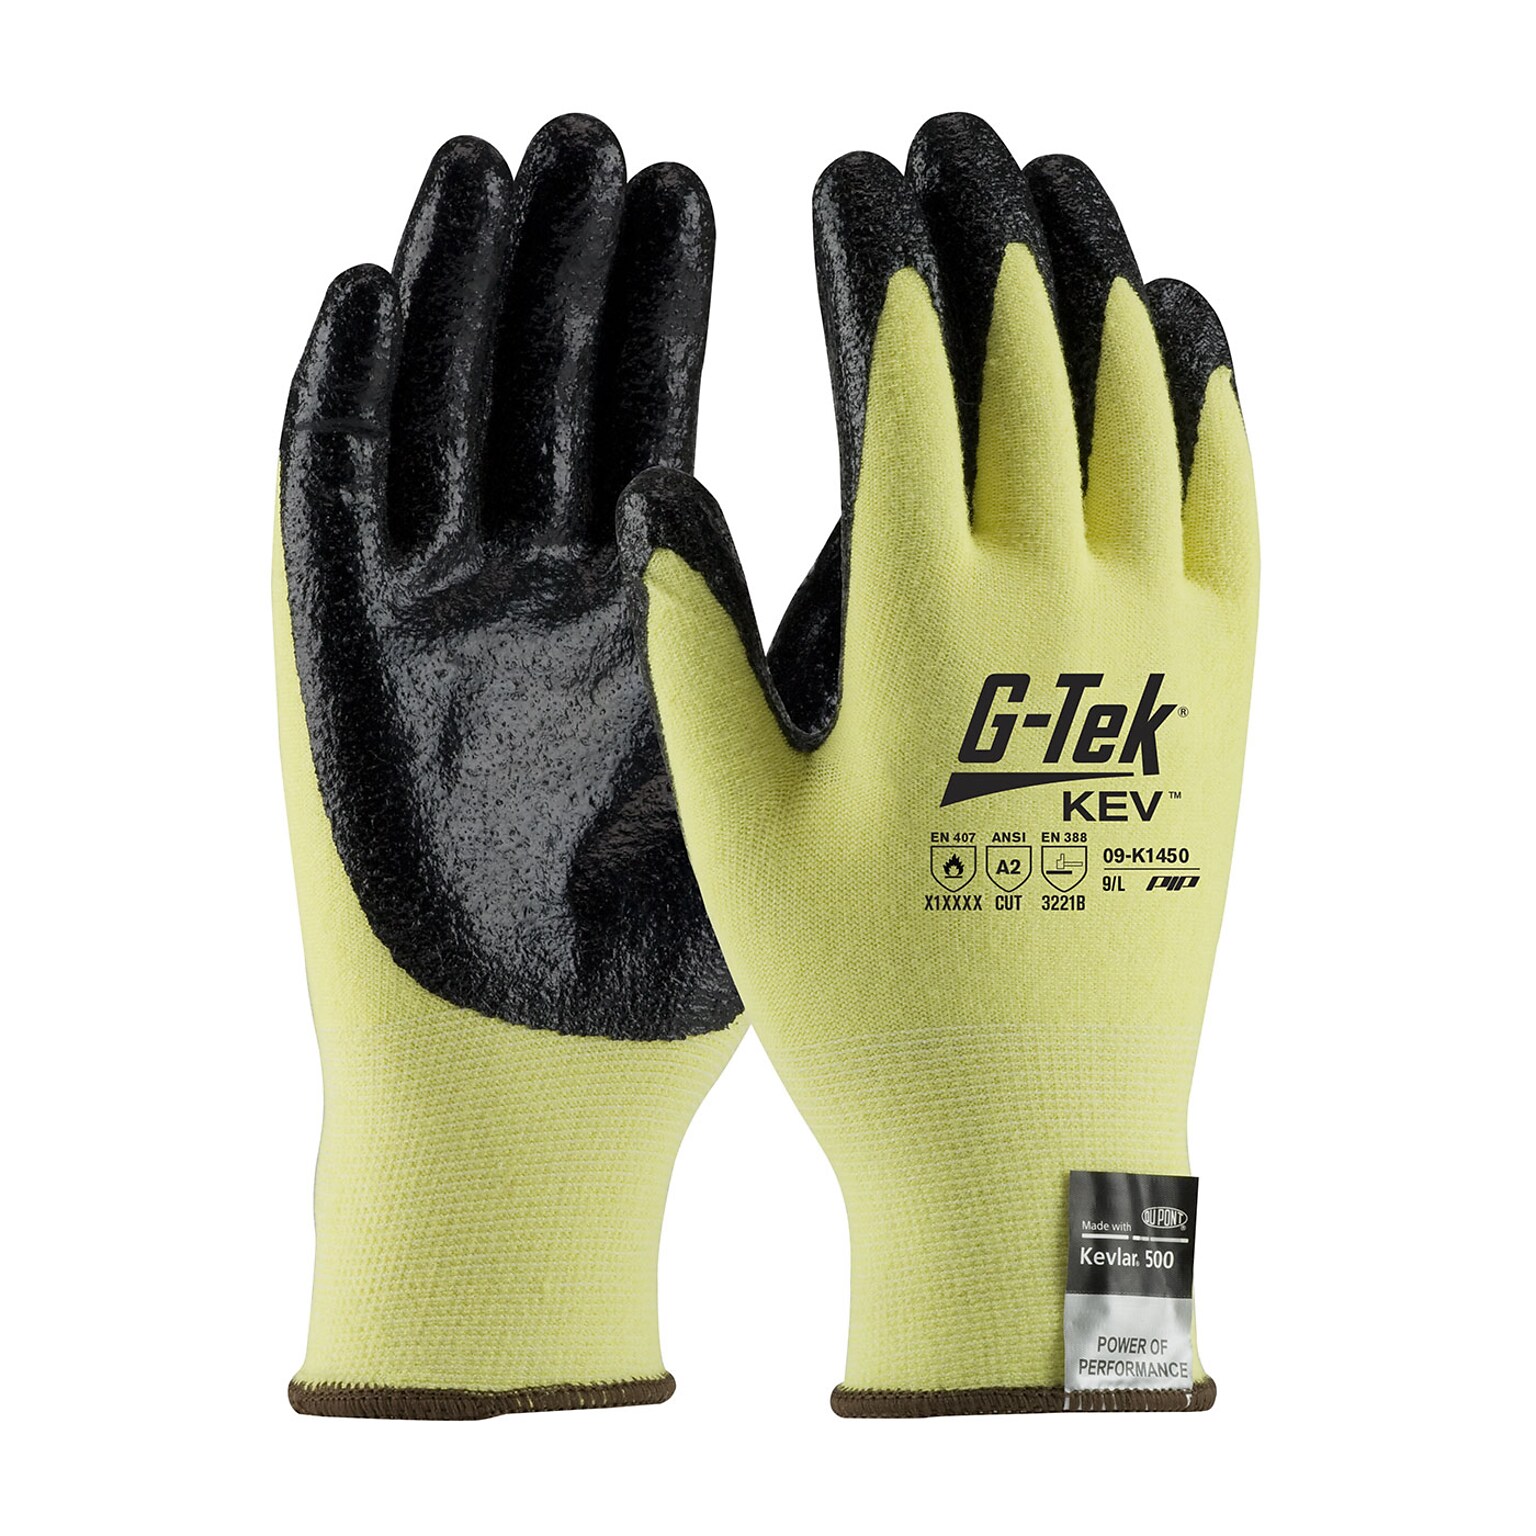 G-Tek KEV Seamless Knit Nitrile Coated Cut Resistant Gloves, ANSI A2, Yellow, Large, 12 Pairs (09-K1450/M)